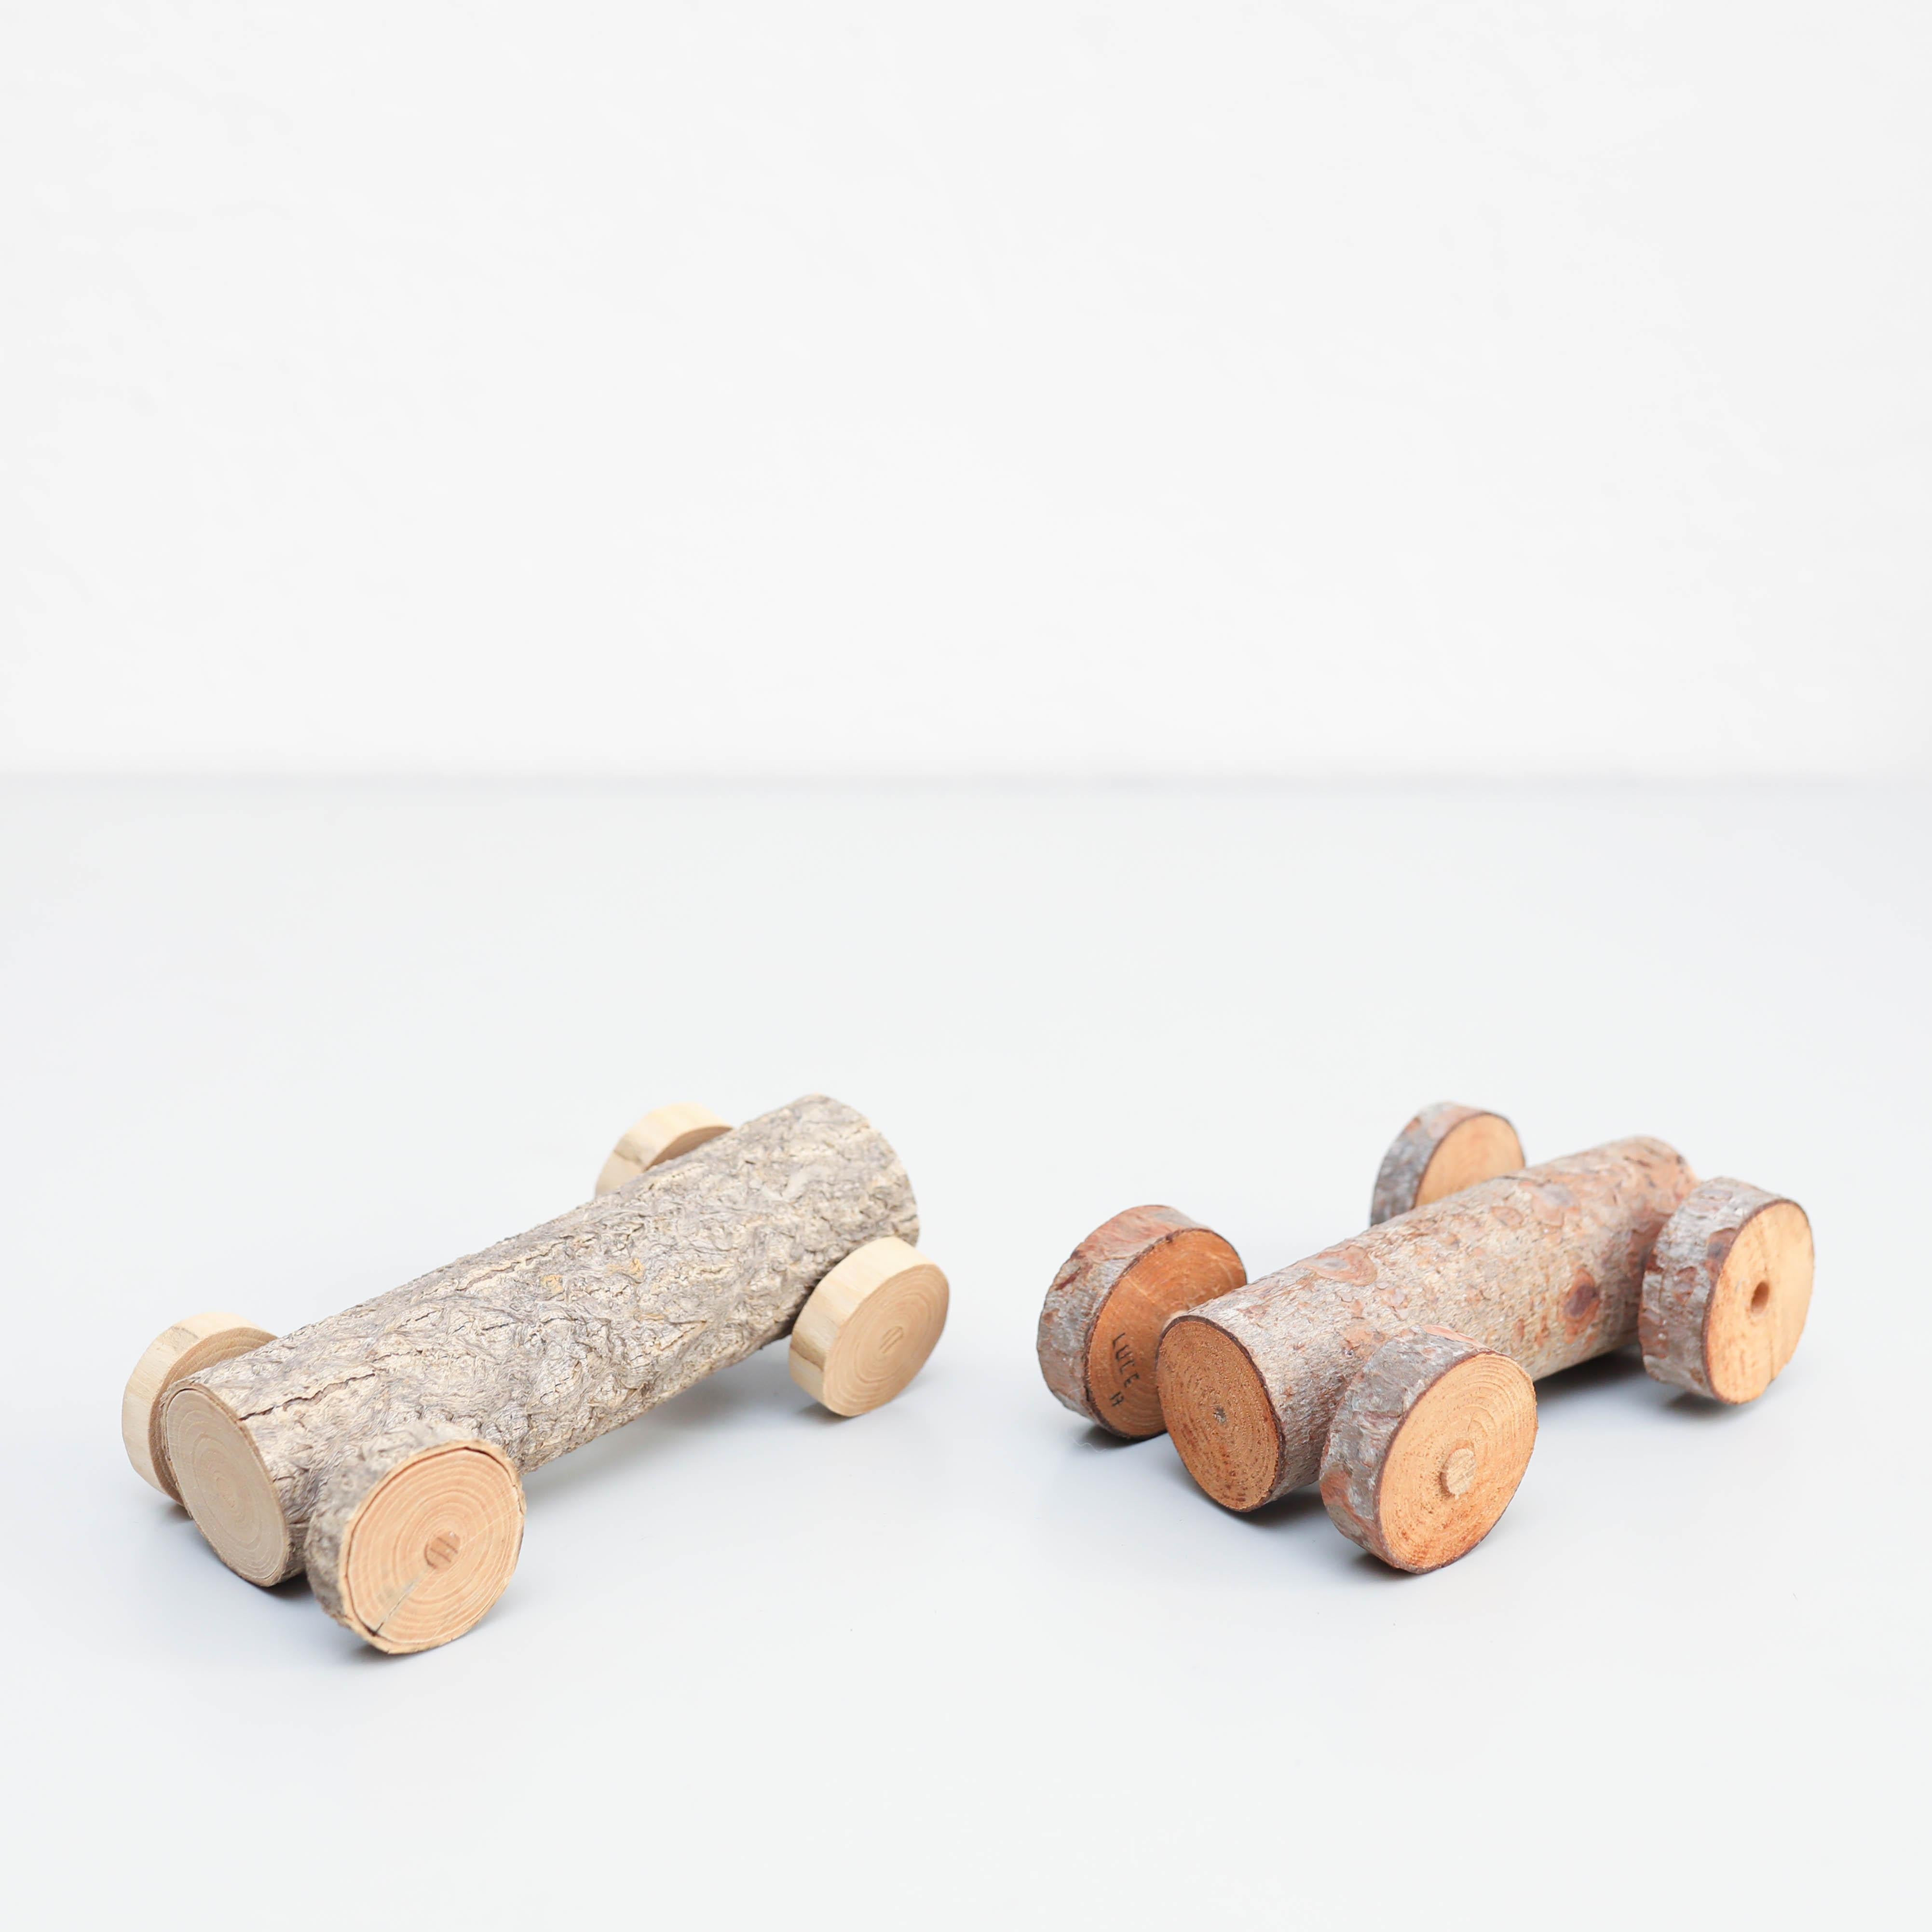 Set of two rustic handmade car toys.
circa 1970.

In original condition, with minor wear consistent with age and use, preserving a beautiful patina.

Materials:
Wood.

Dimensions (each one):
D 9.5 cm x W 18 cm x H 8 cm.